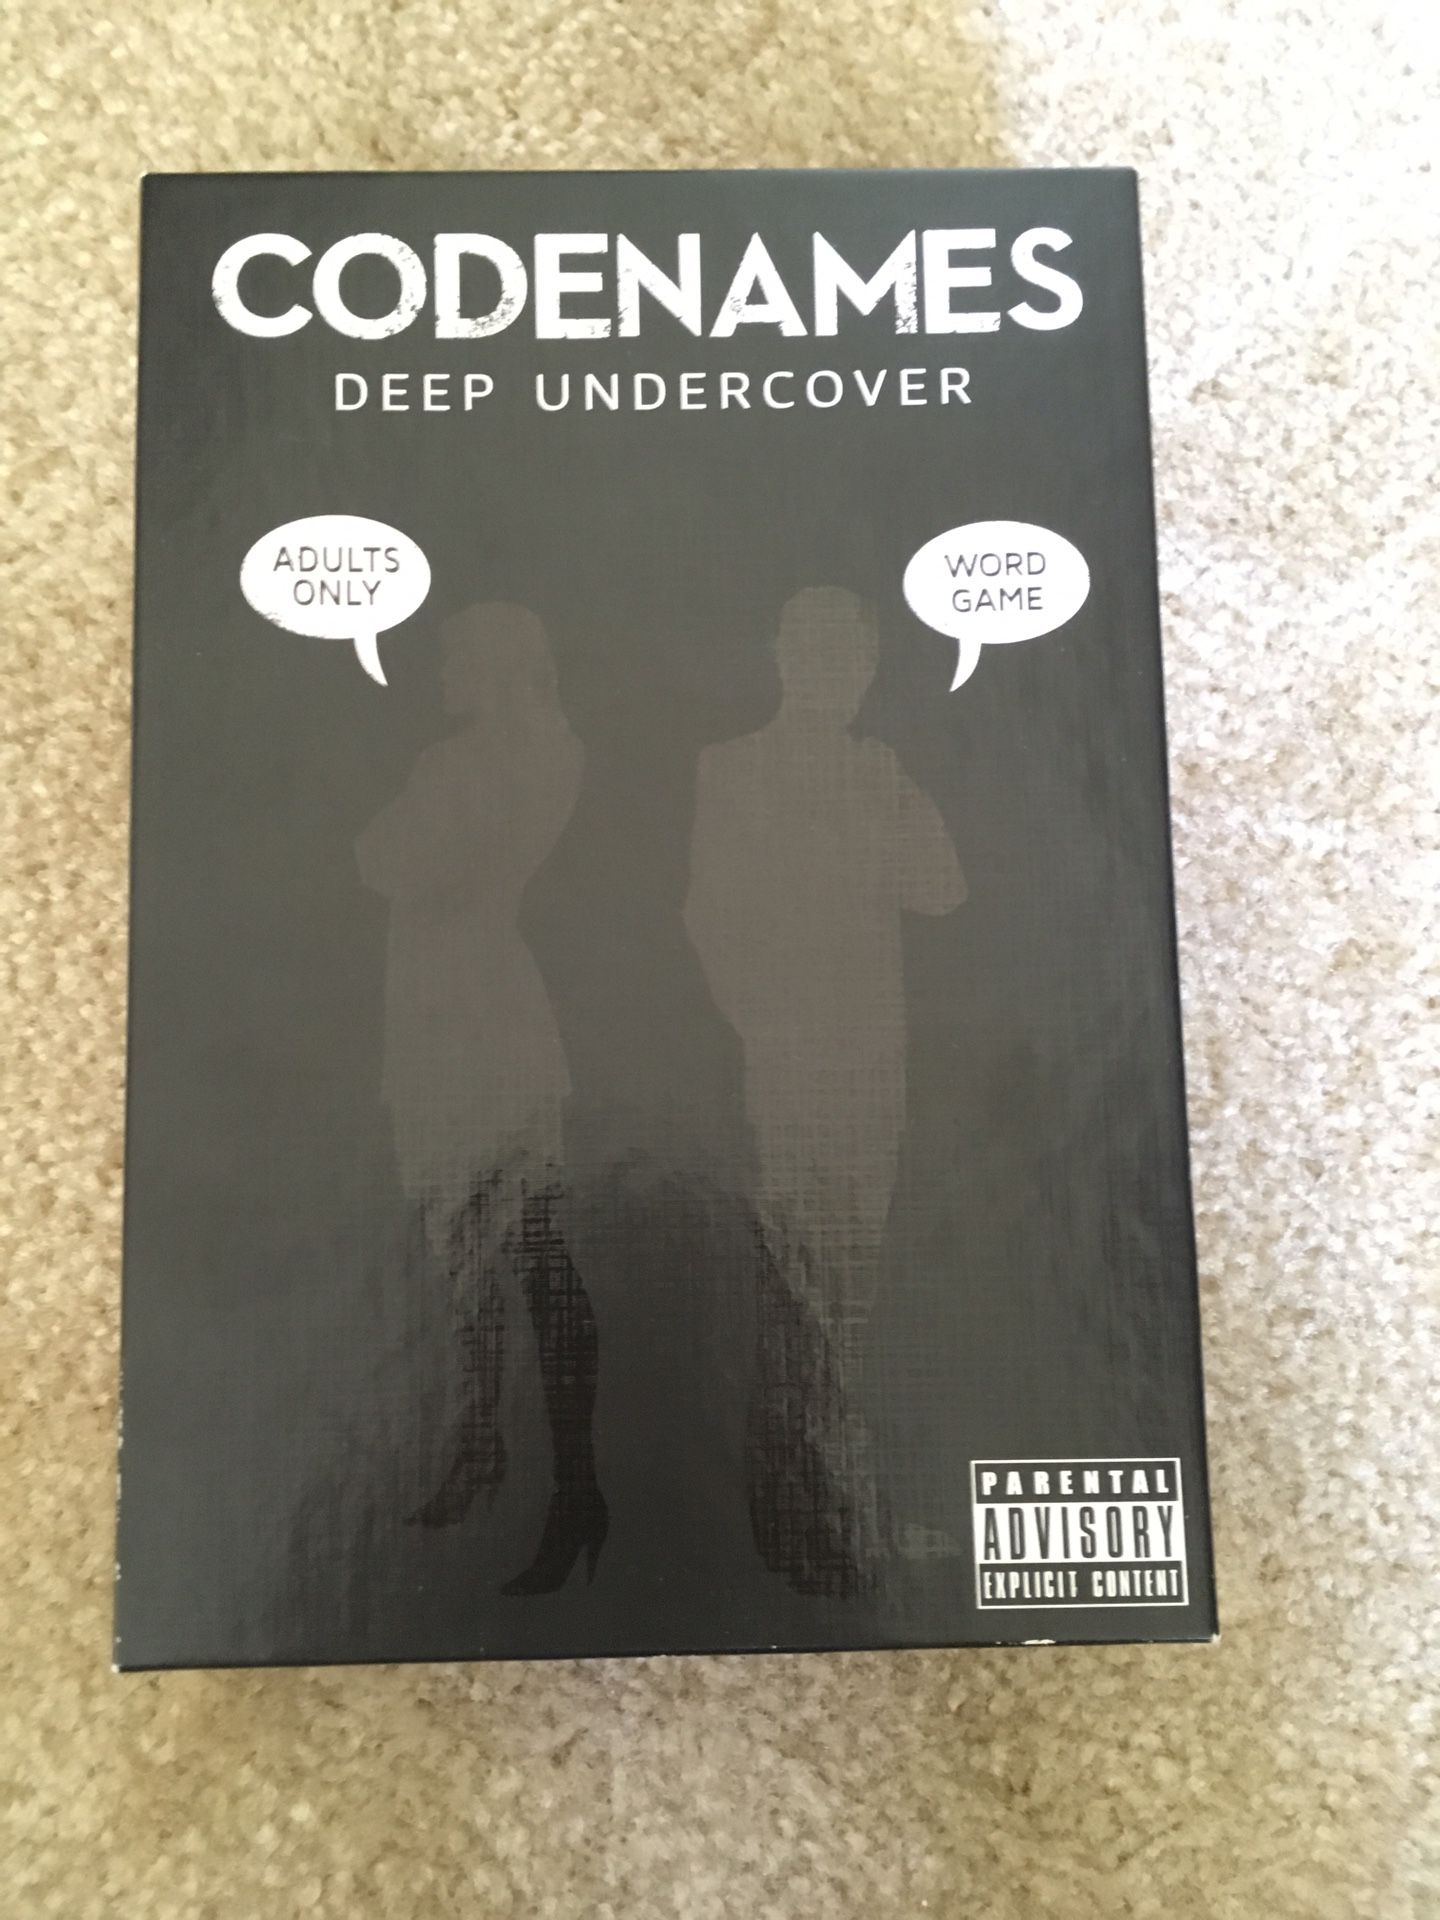 Code names - Adults only